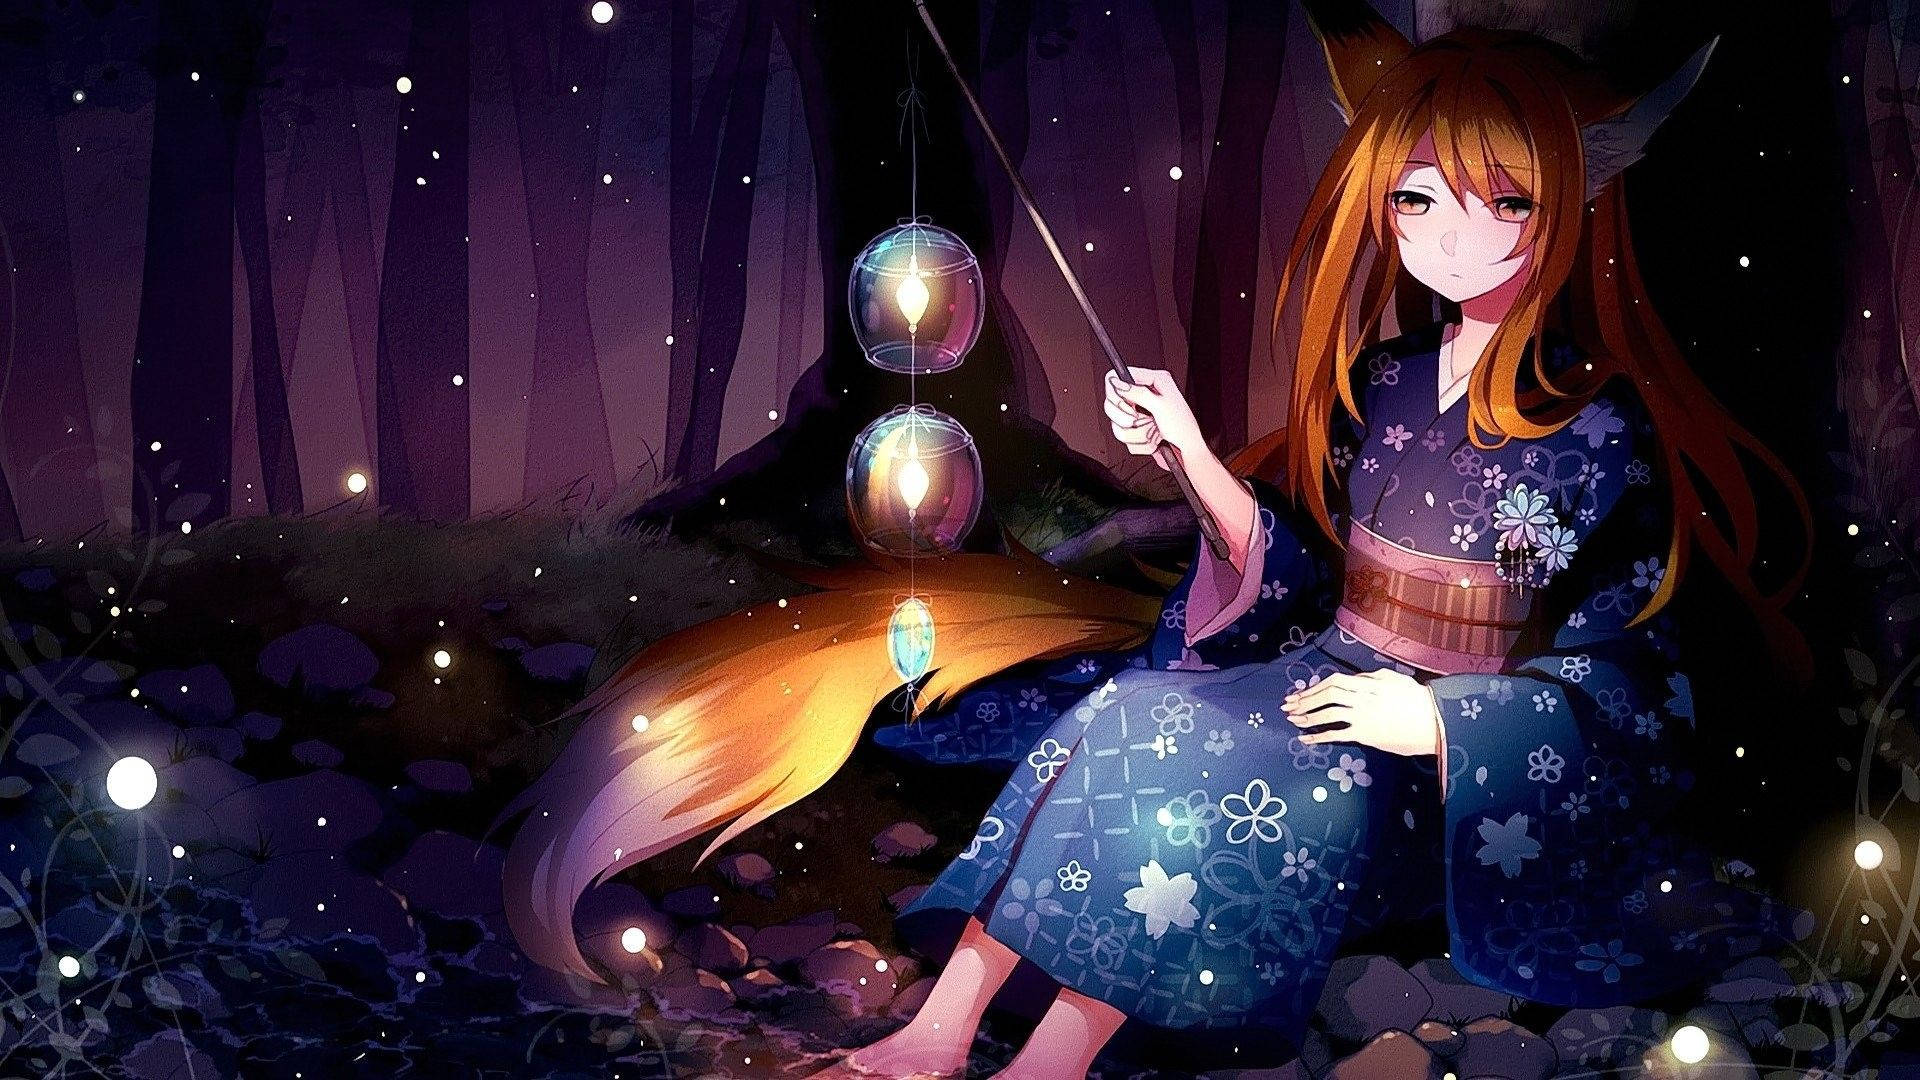 A Girl In A Long Dress Sitting In The Woods With Lanterns Wallpaper